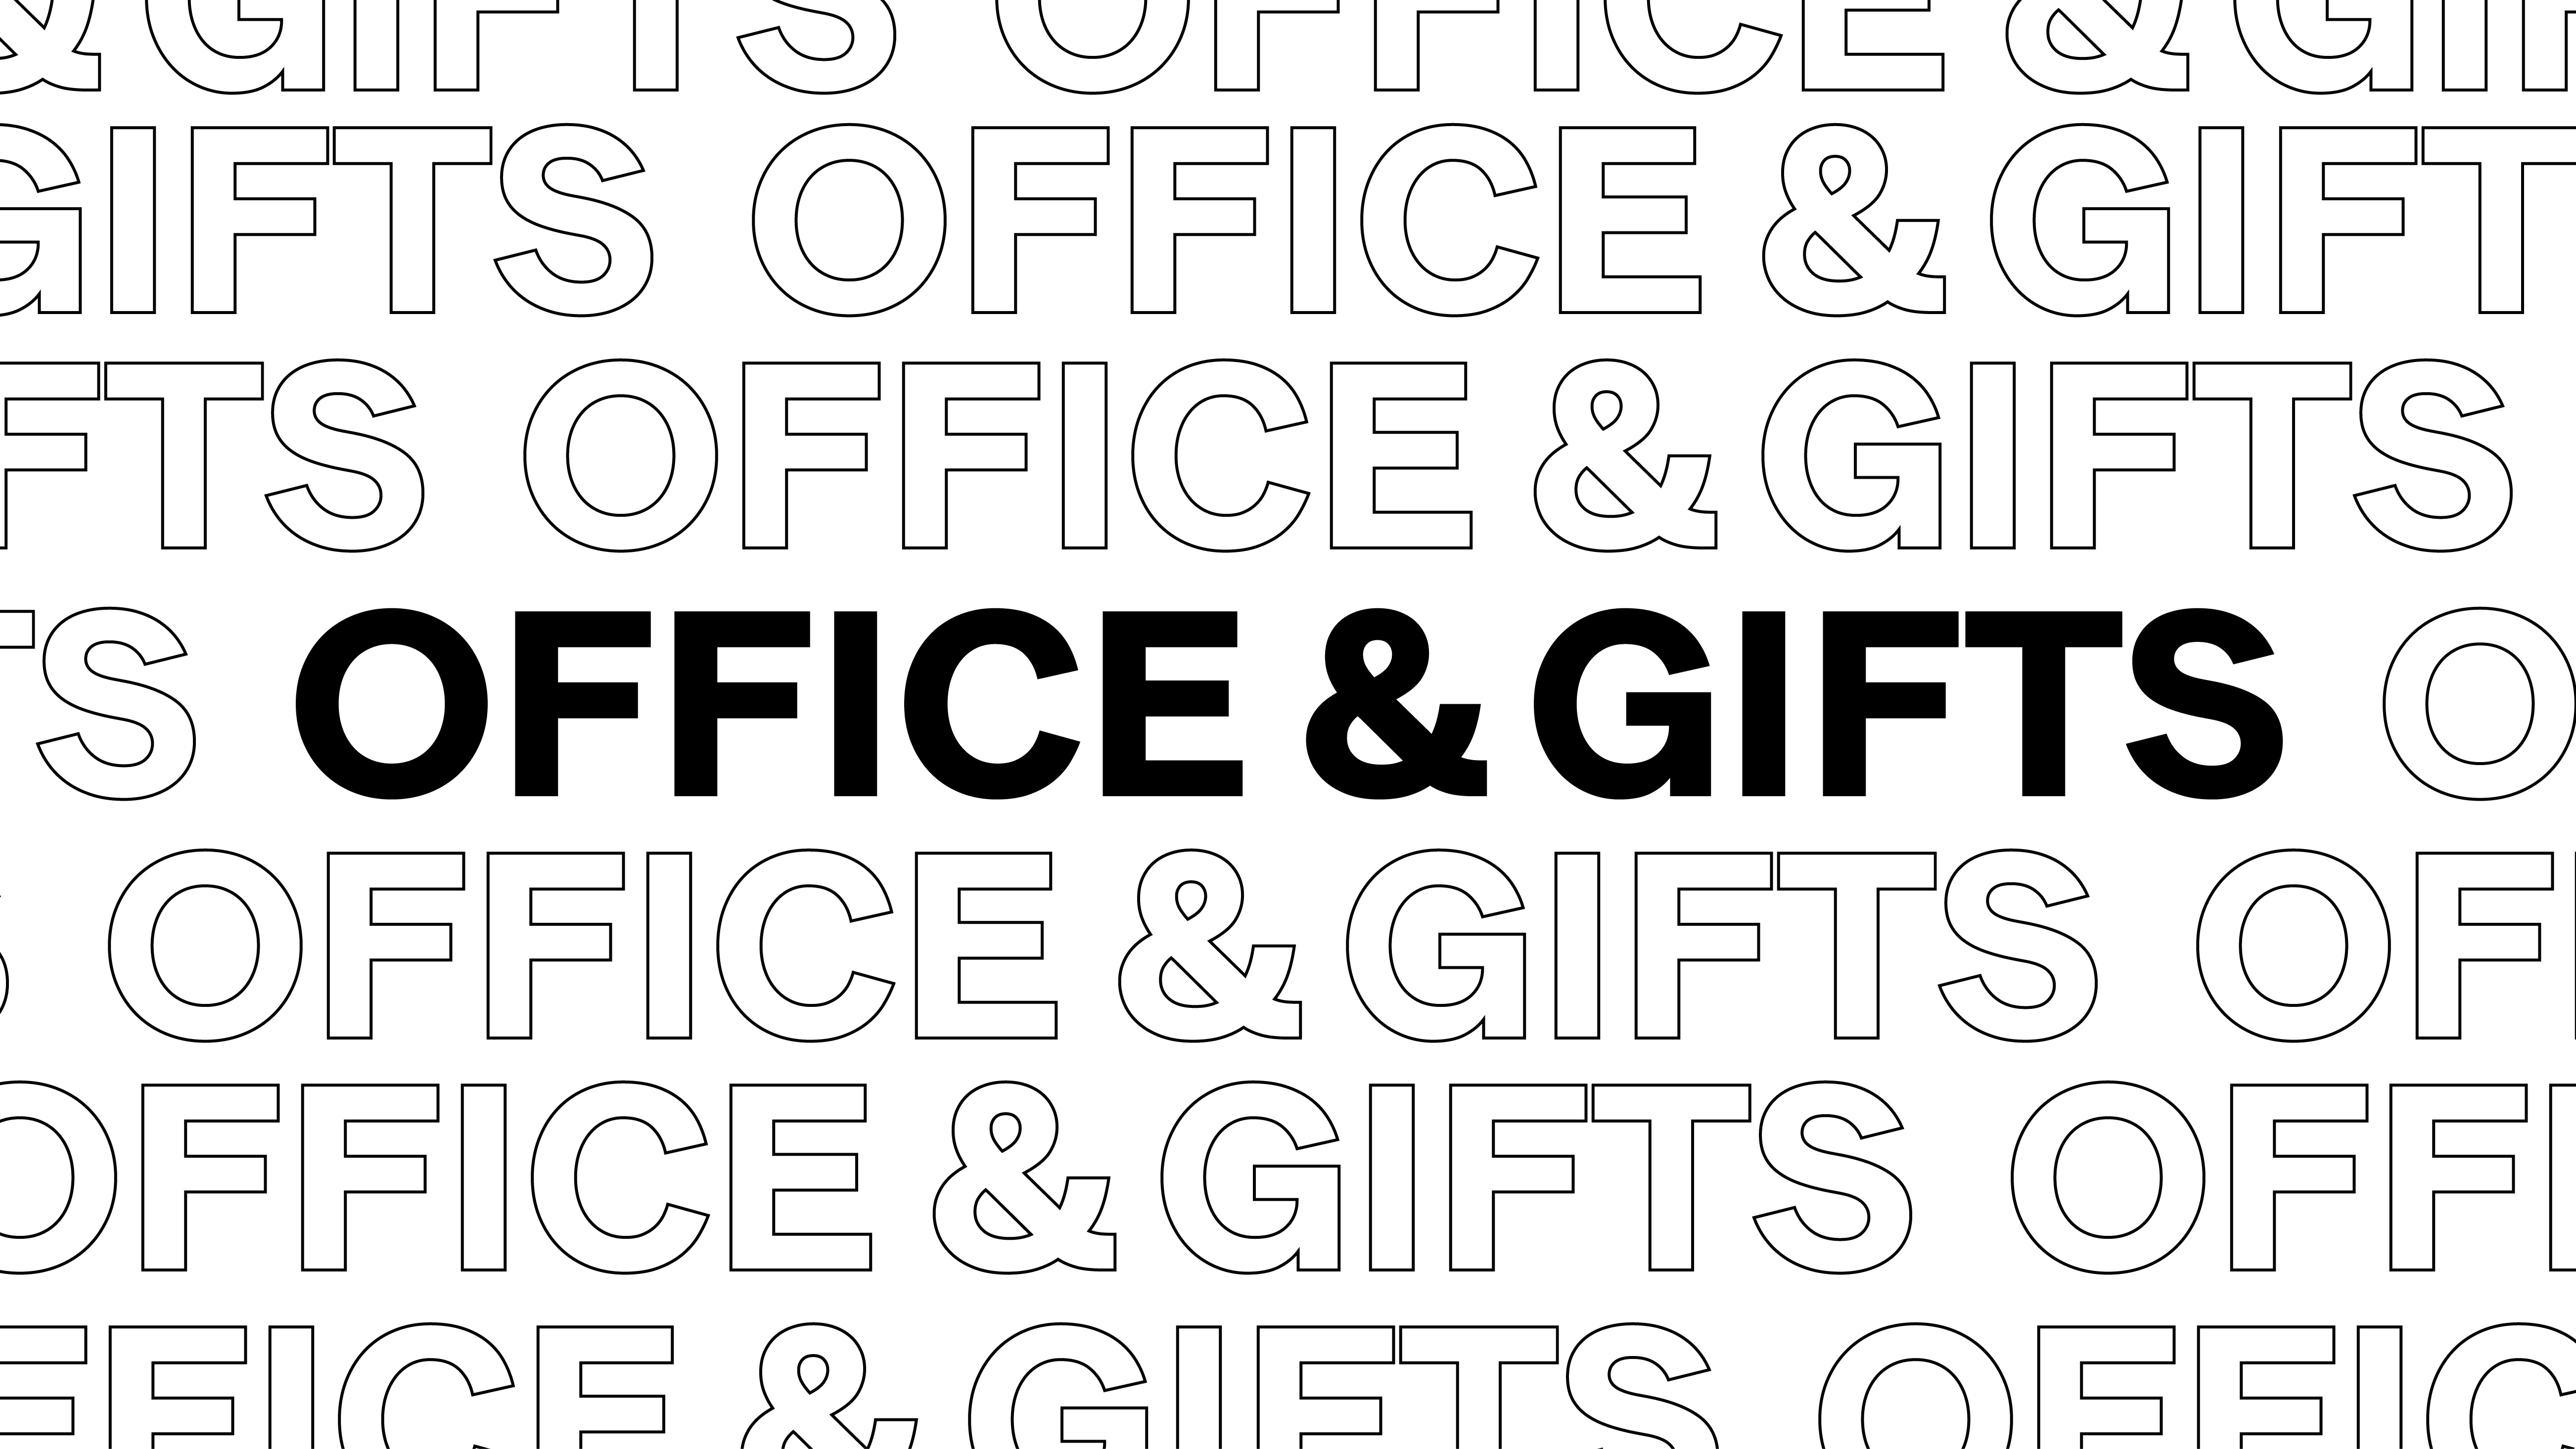 Office & Gifts